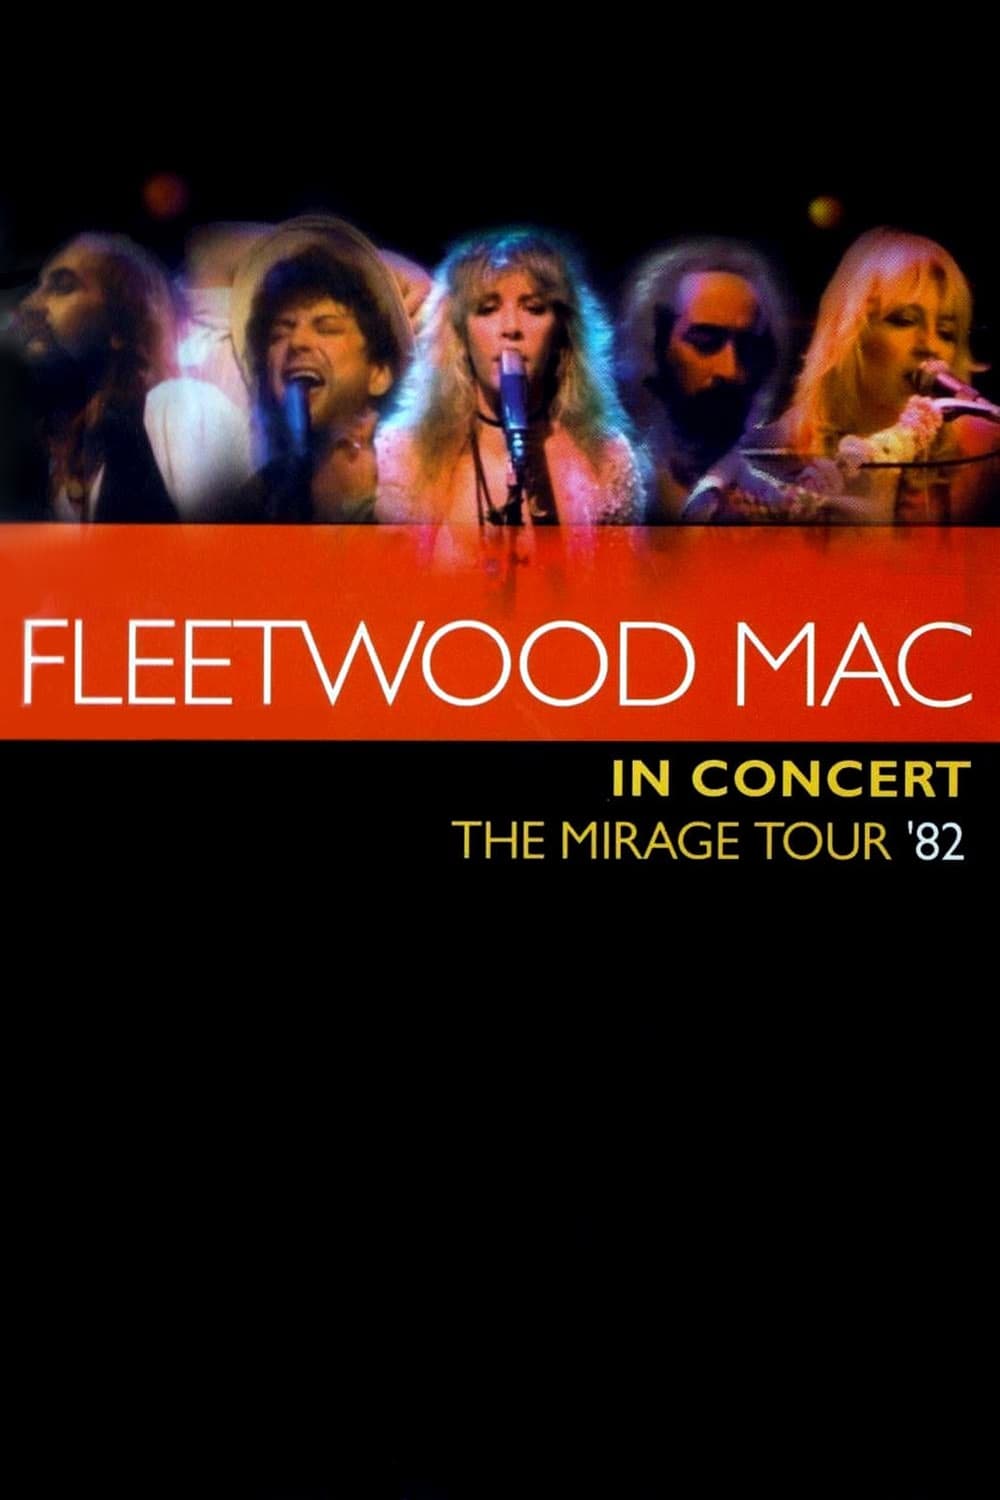 Fleetwood Mac in Concert - The Mirage Tour streaming